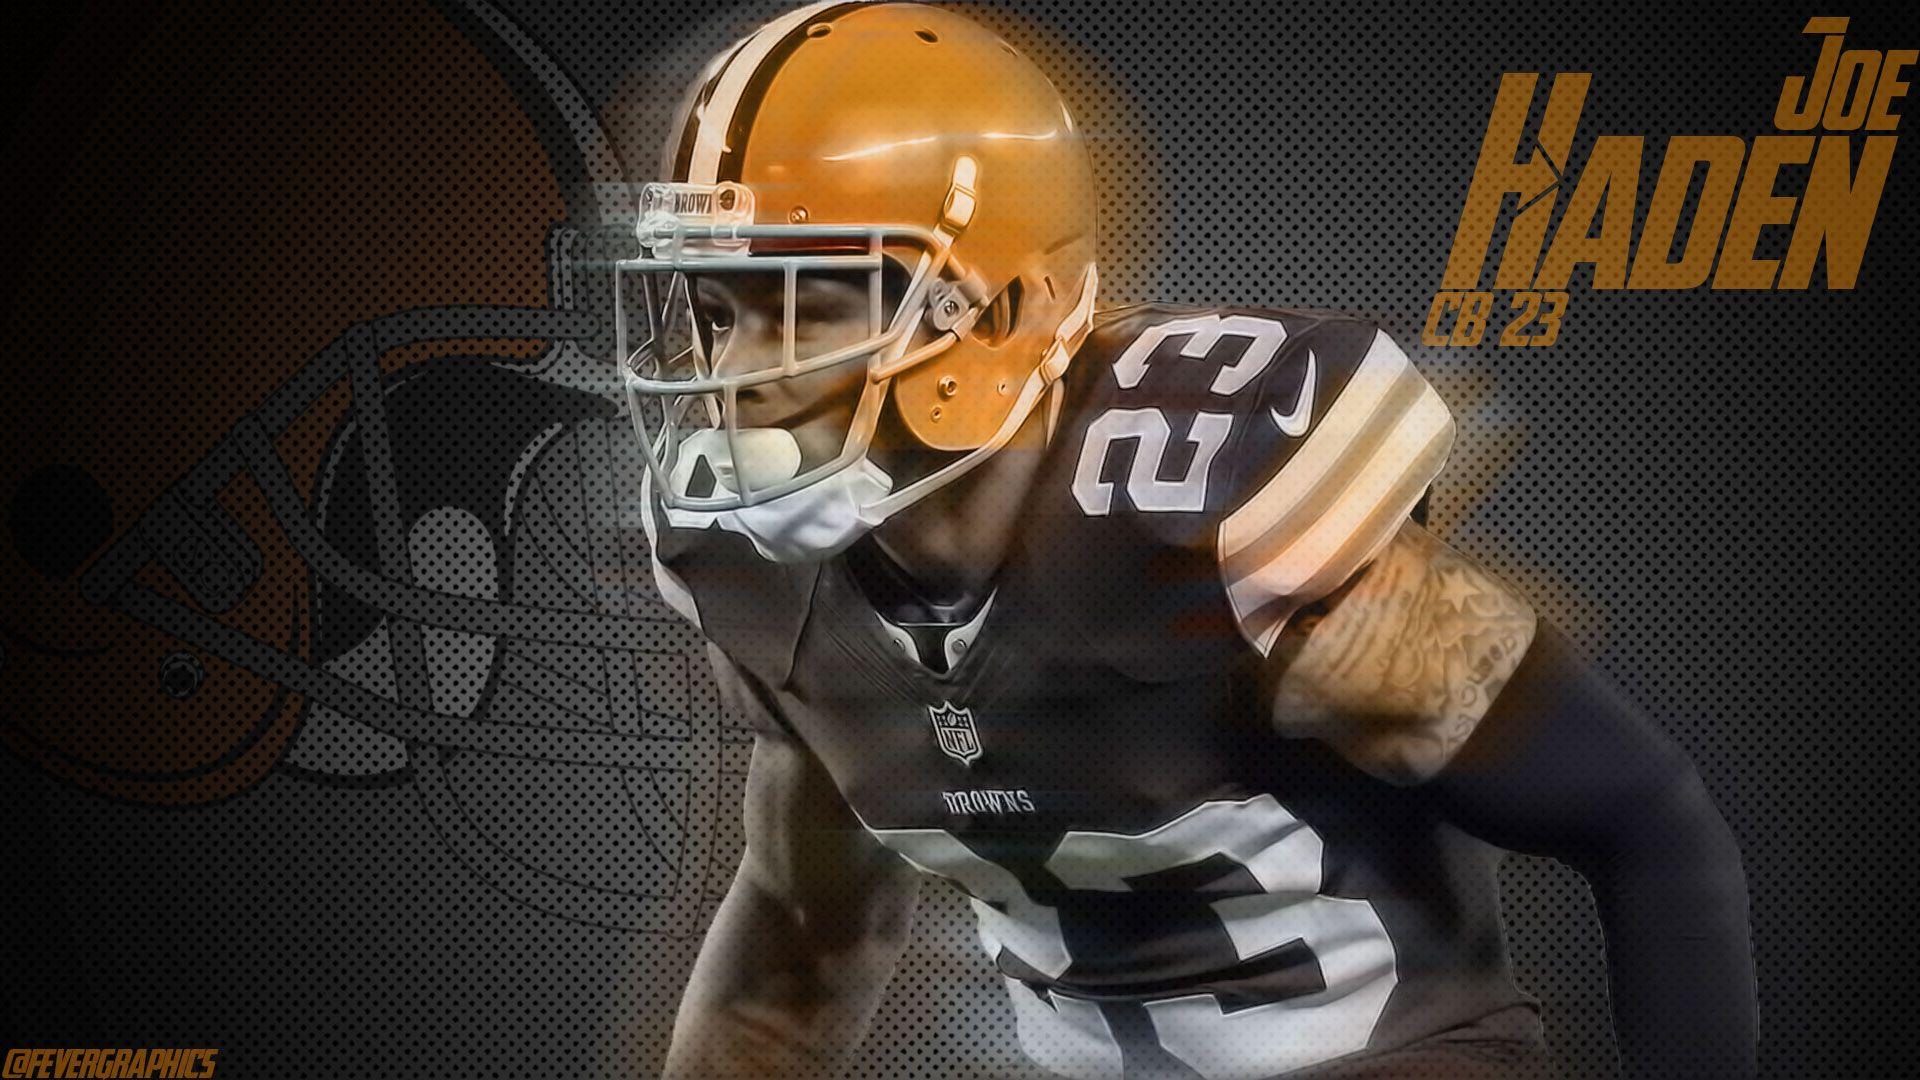 Browns sub! I made you guys a Joe Haden wallpaper! One of my